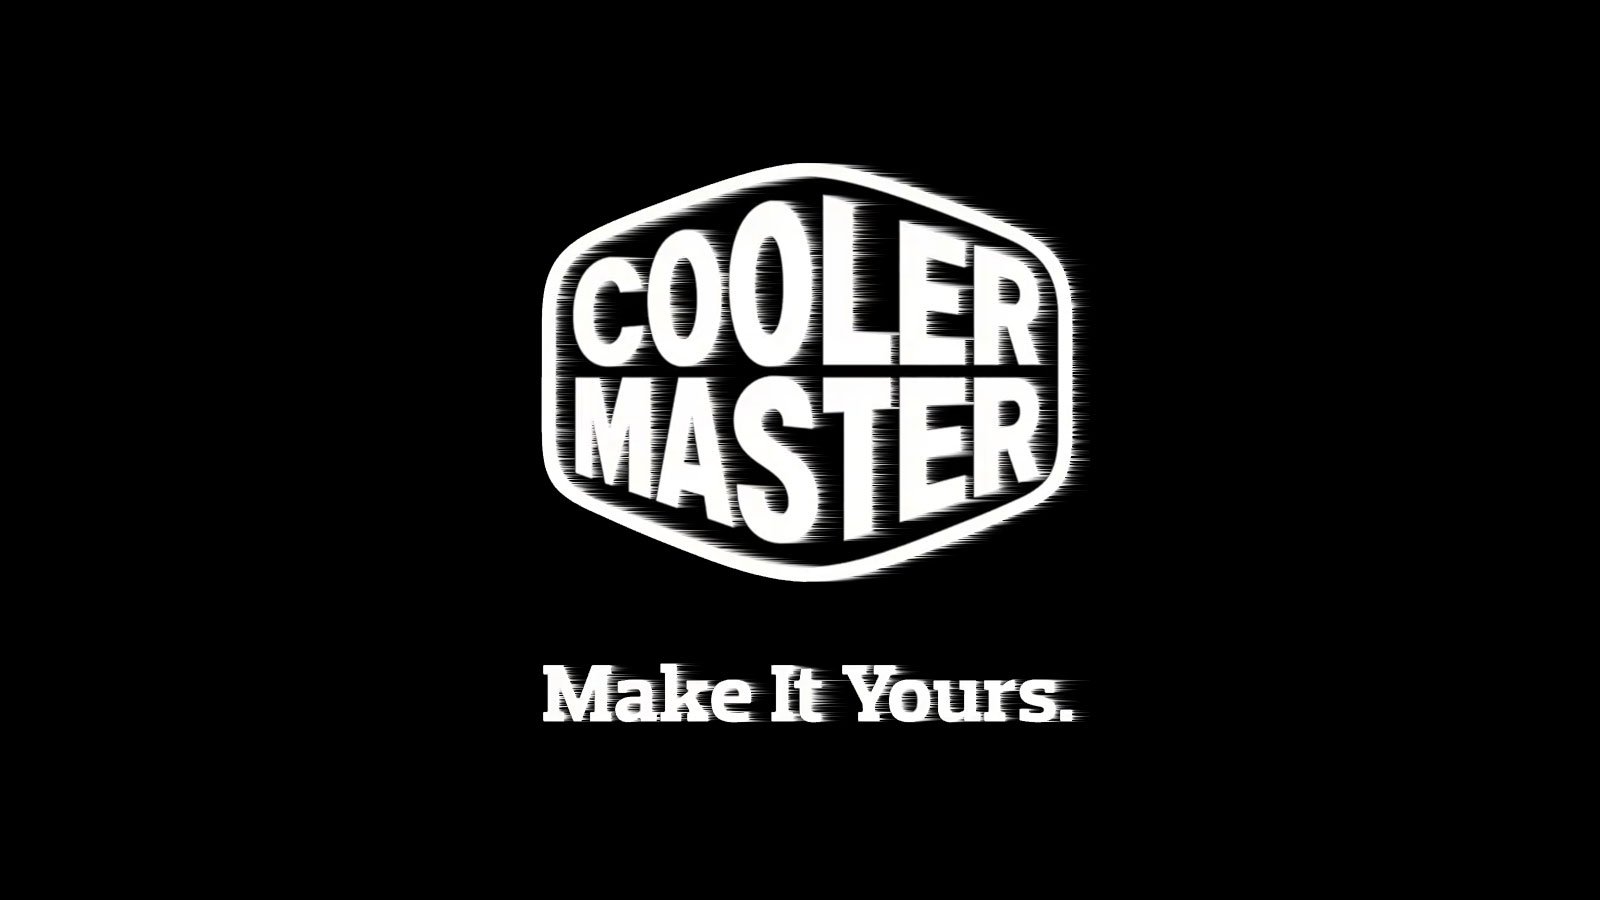 Cooler Master Hit by Data Breach Exposing 500K Customers' Information (2 minute read)